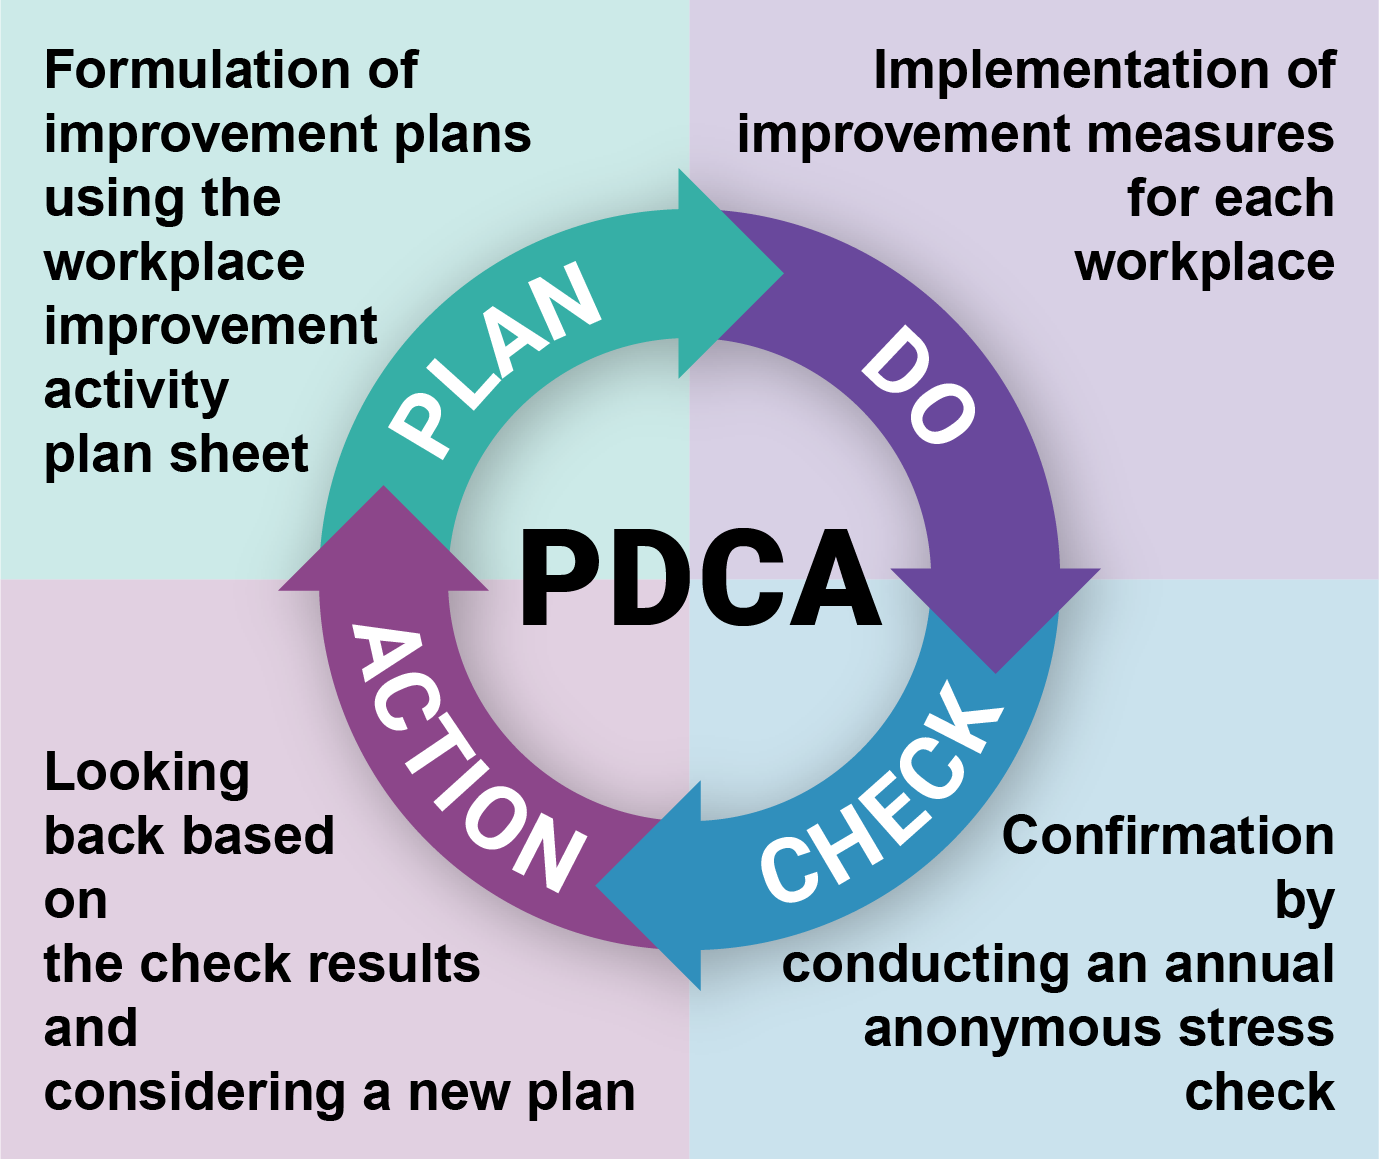 PLAN Formulation of improvement plans using the workplace improvement activity plan sheet DO Implemention of improvement measures for each workplace ACTION Looking back based on the check results and considering a new plan CHECK Confirmation by conducting anannual anonymous stress check